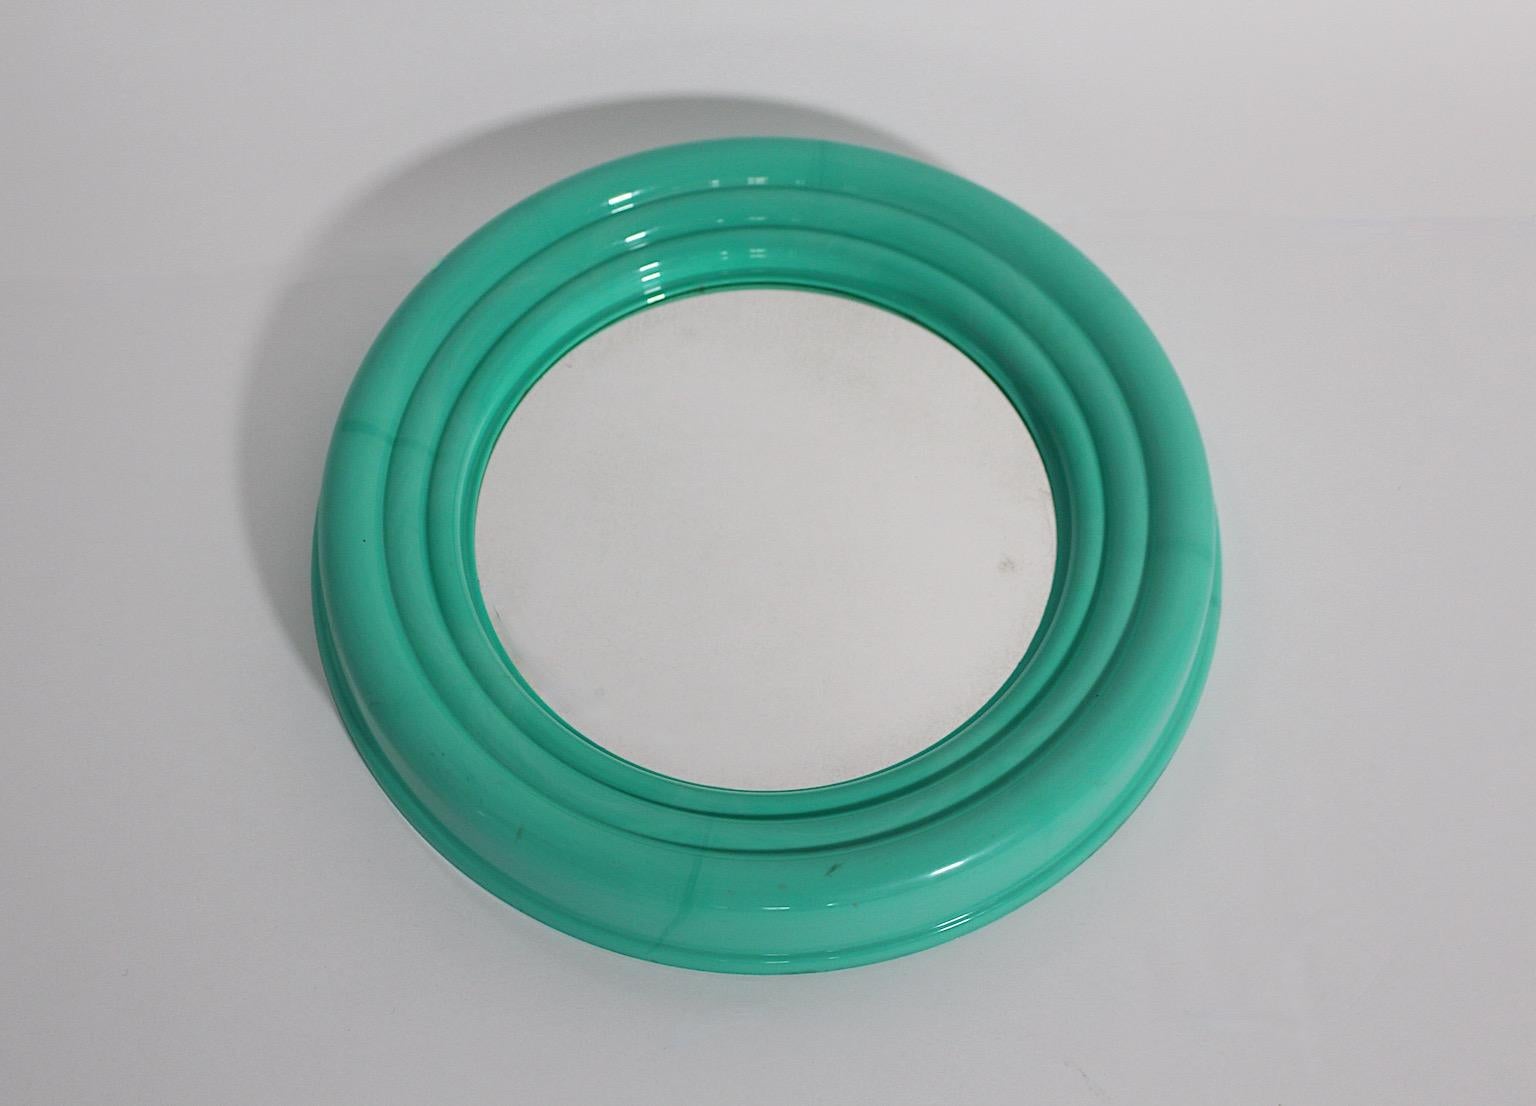 Post-Modern Pop Art Style Green Teal Circular Plastic Wall Mirror 1990s Italy For Sale